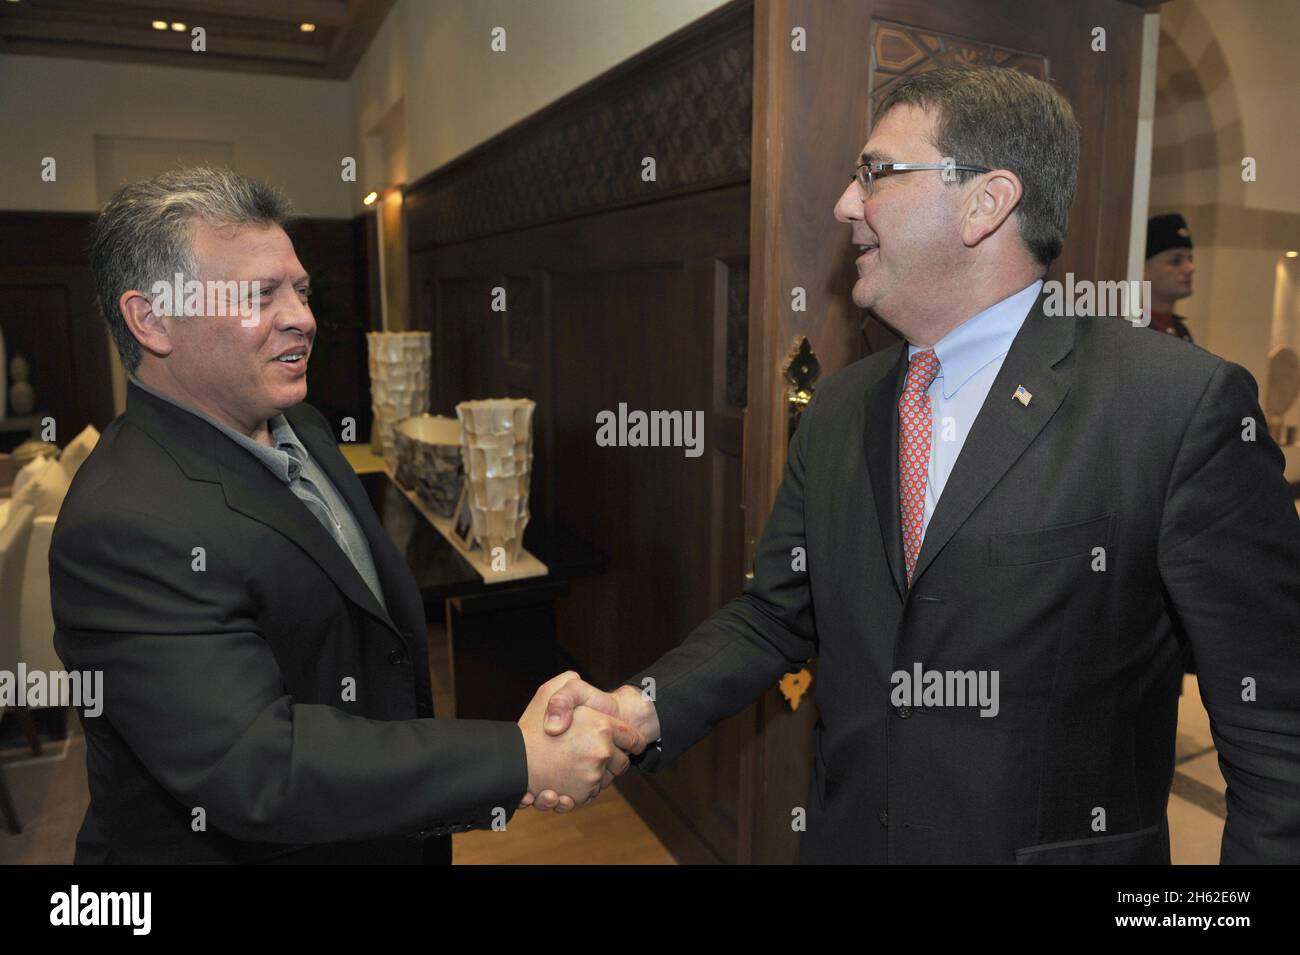 Deputy Secretary of Defense Ashton Carter is engages in a handshake with Jordan's King Abdullah II as he arrives to meet at the Royal Pallace in Amman, Jordan, Feb. 5, 2013 Stock Photo